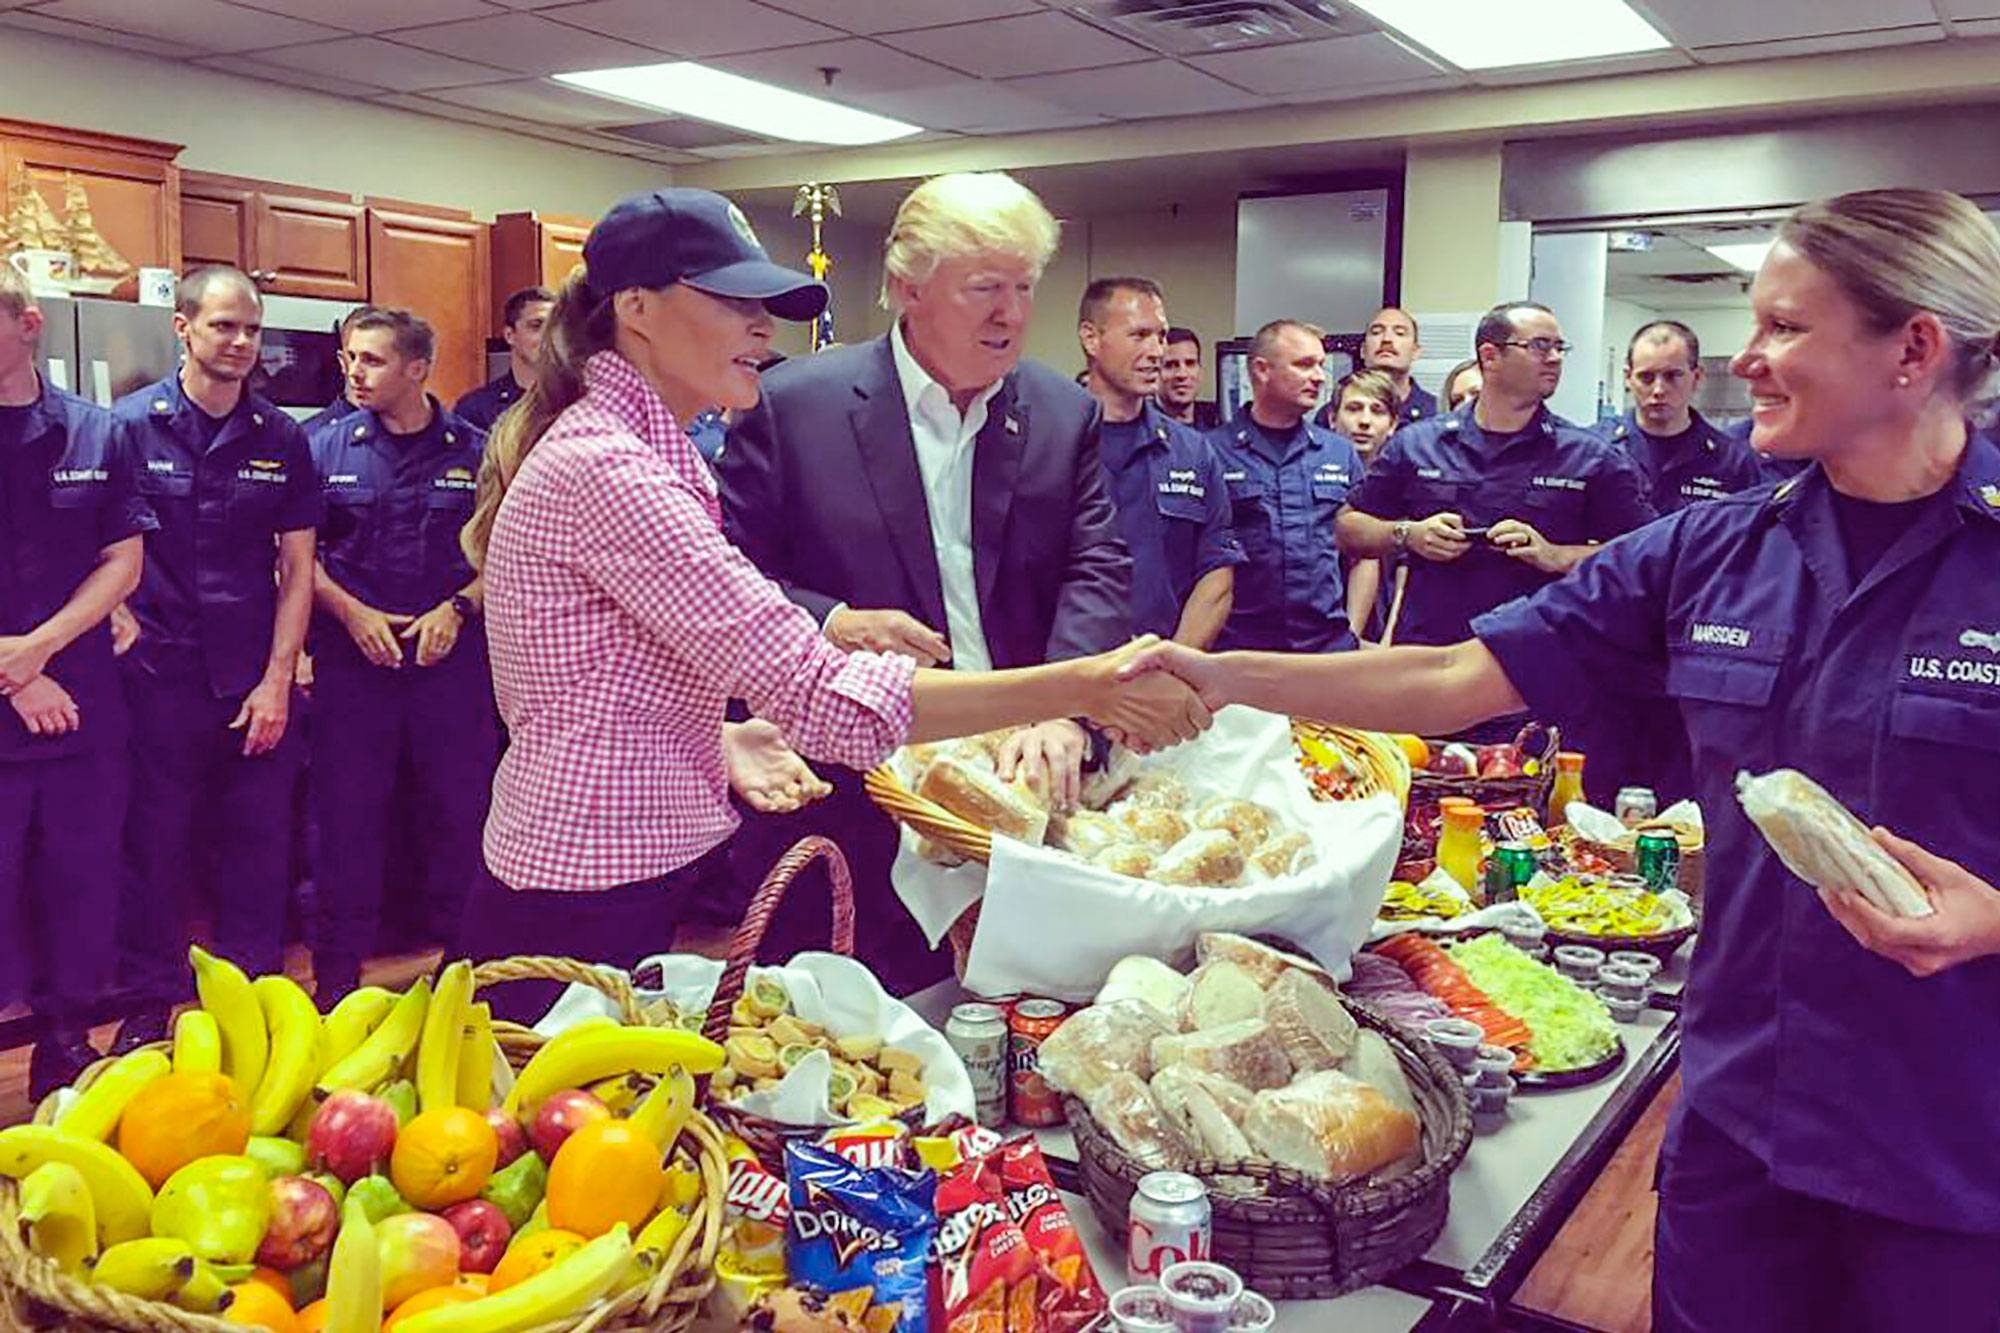 President Donald J. Trump looks on as First Lady Melania Trump shakes hands with a member of the Coast Guard during a Thanksgiving day visit to the Coast Guard station in Riviera Beach, Fla., Nov. 23, 2017.